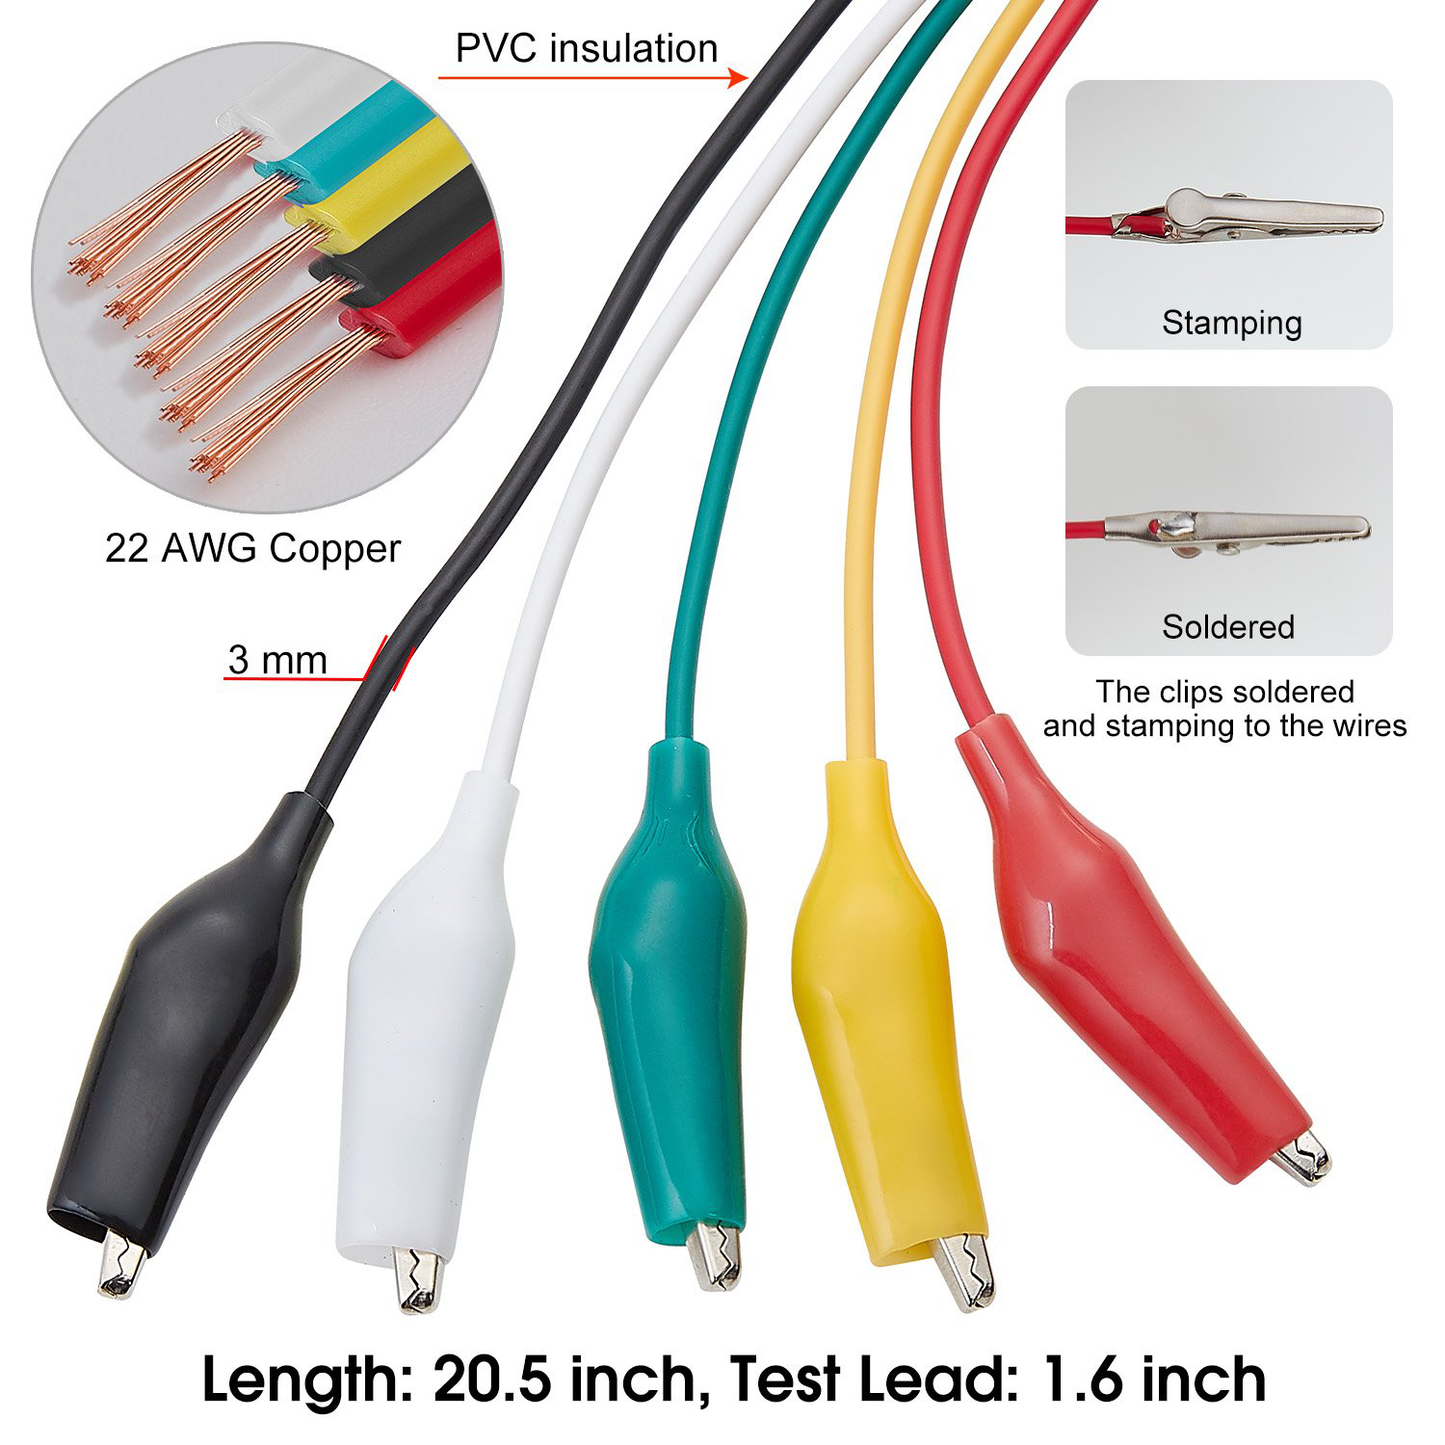 WGGE WG-026 10 Pieces and 5 Colors Test Lead Set & Alligator Clips,20.5 inches (2 Pack)